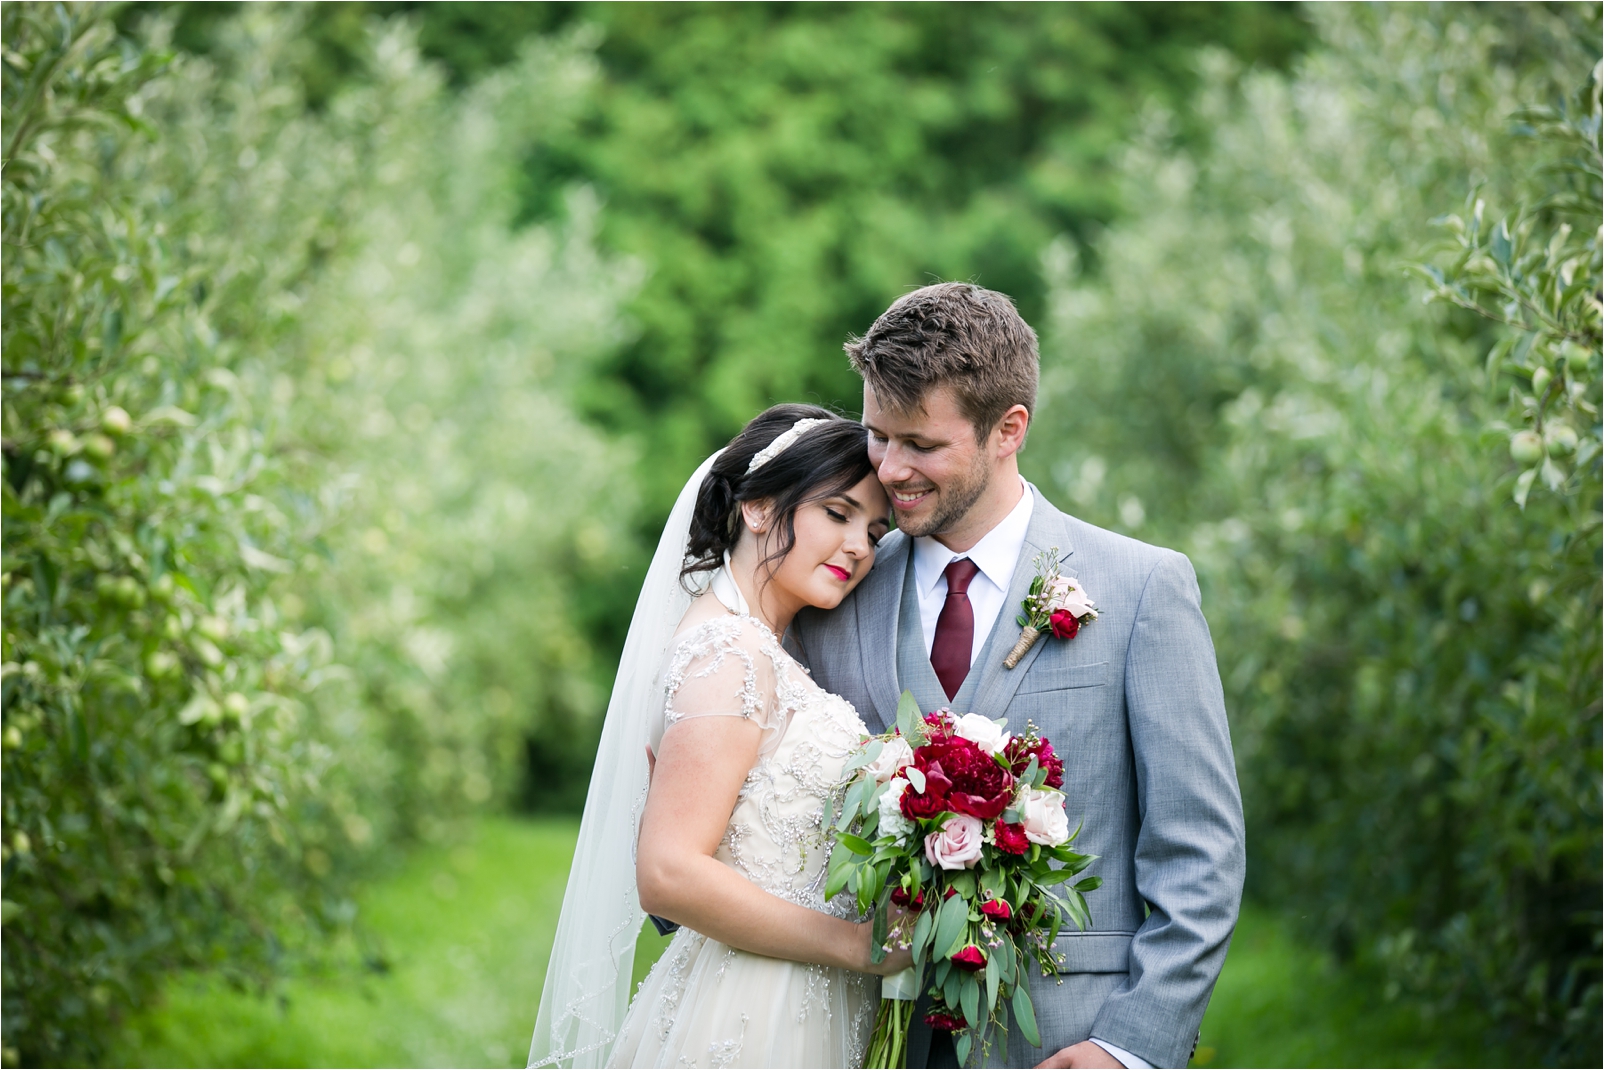 You Me Photography - Best Chicago Photography Services